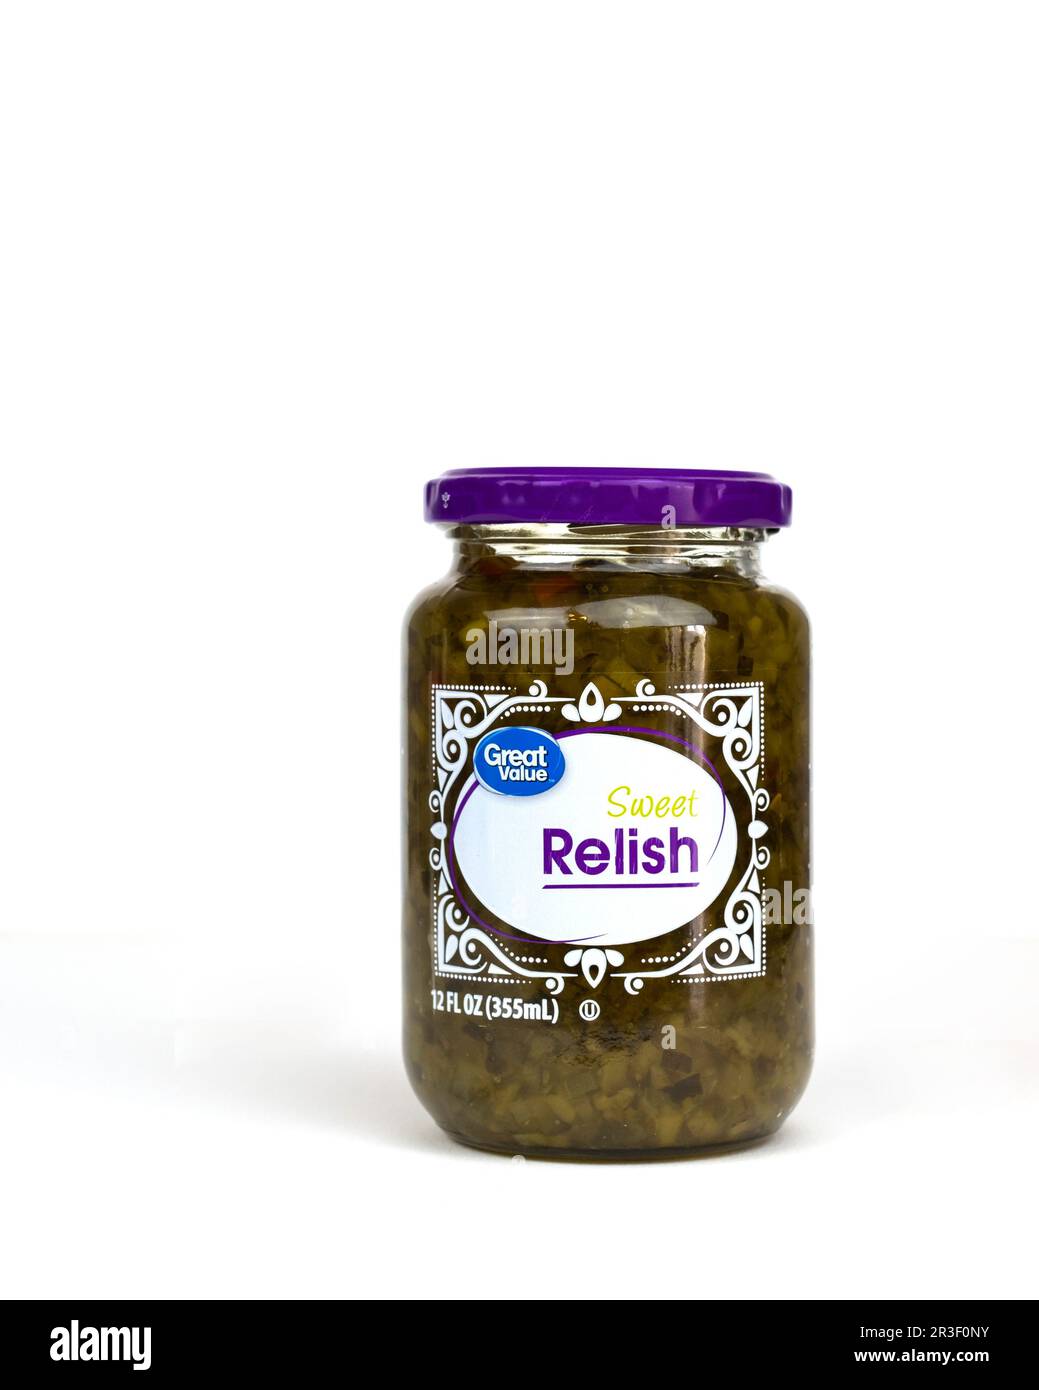 Jar of Great Value brand sweet relish, a pickle relish on a white background. USA. Stock Photo